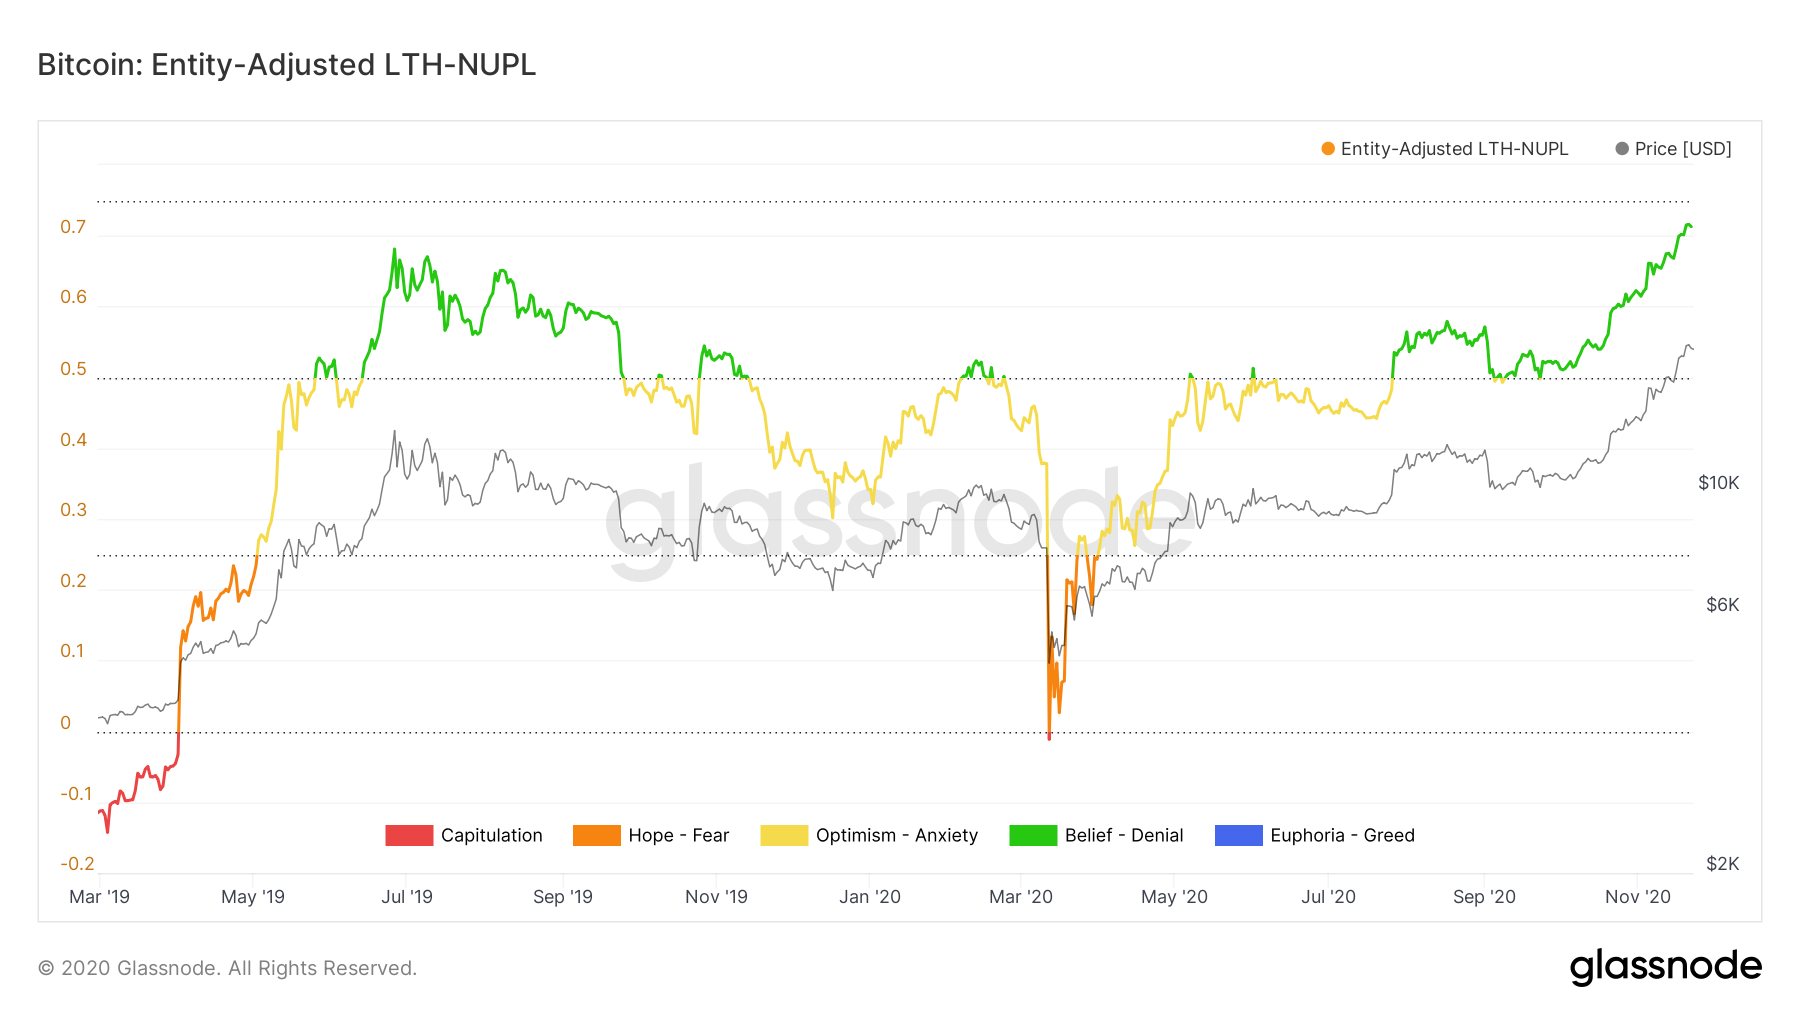 Bitcoin Entity-adjusted LTH-NUPL chart